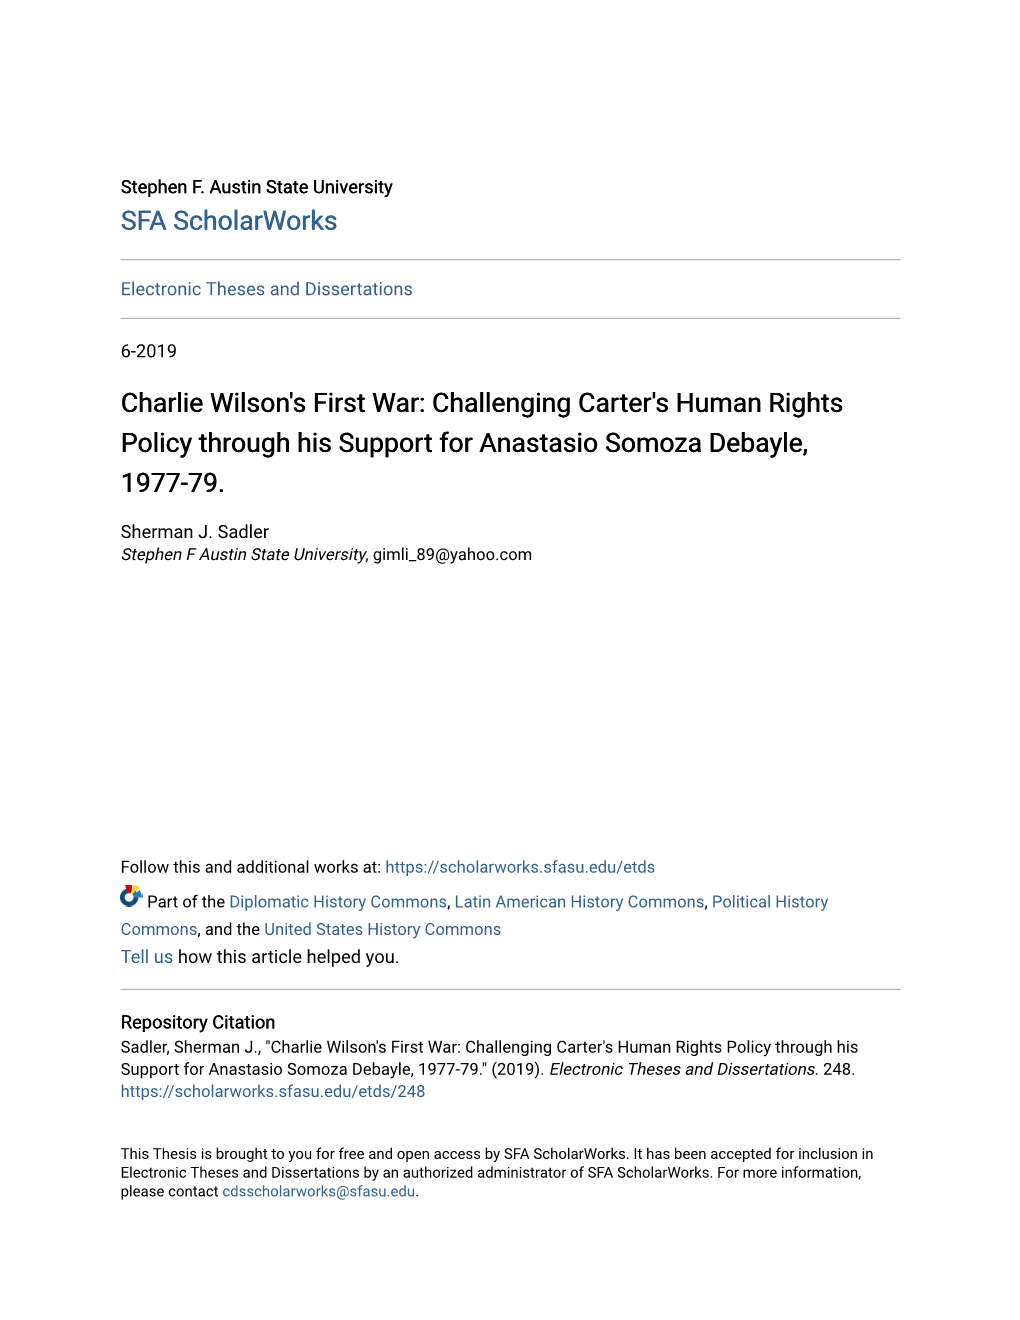 Charlie Wilson's First War: Challenging Carter's Human Rights Policy Through His Support for Anastasio Somoza Debayle, 1977-79